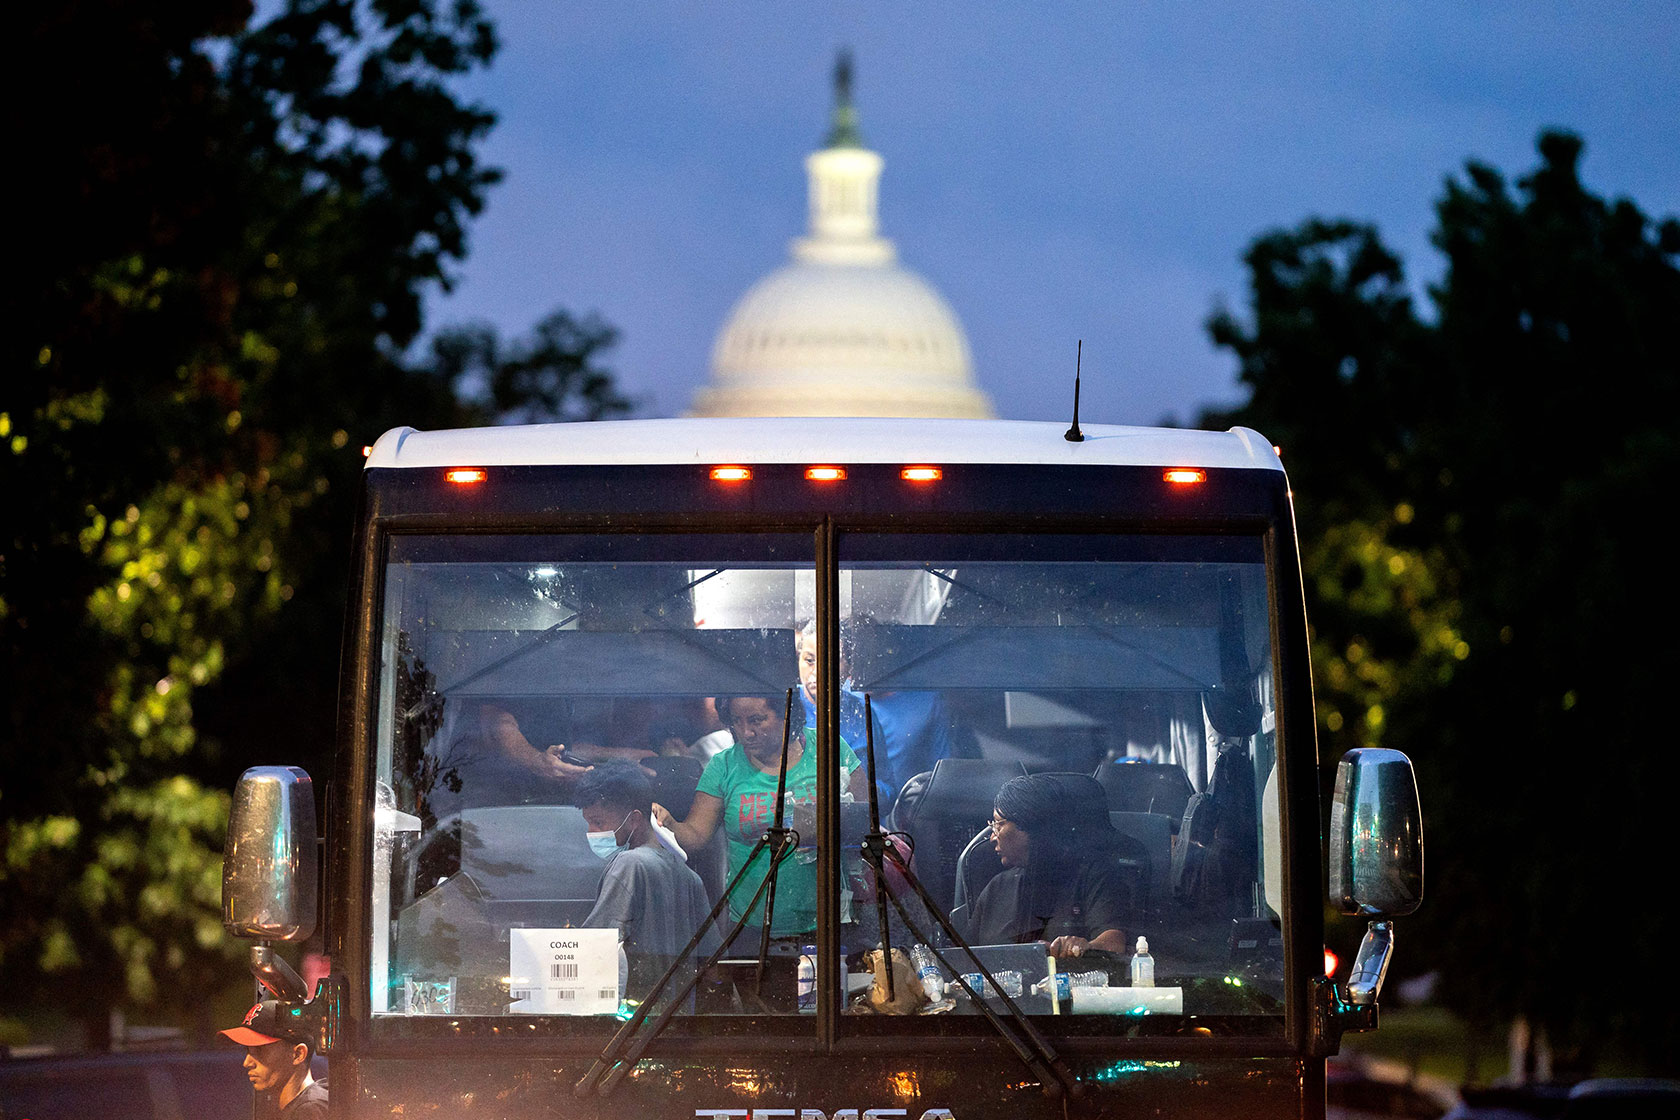 Migrants, who boarded a bus in Texas, are dropped off within view of the U.S. Capitol building.